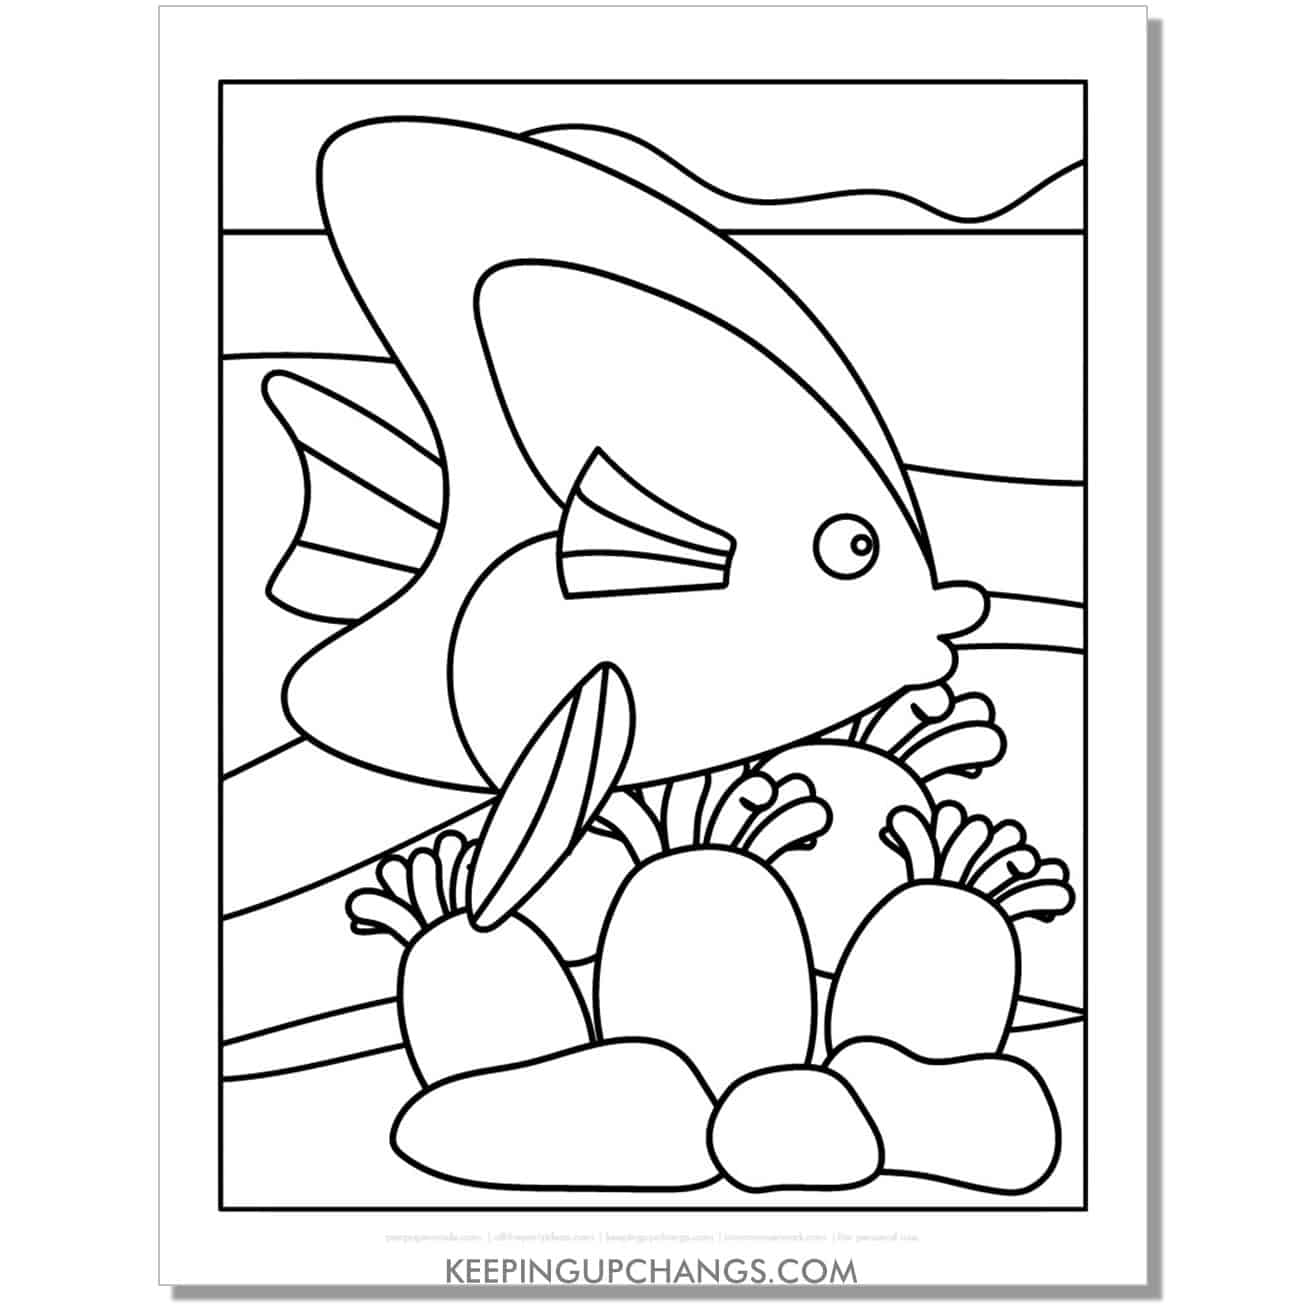 free easy full size fish coloring page, sheet.